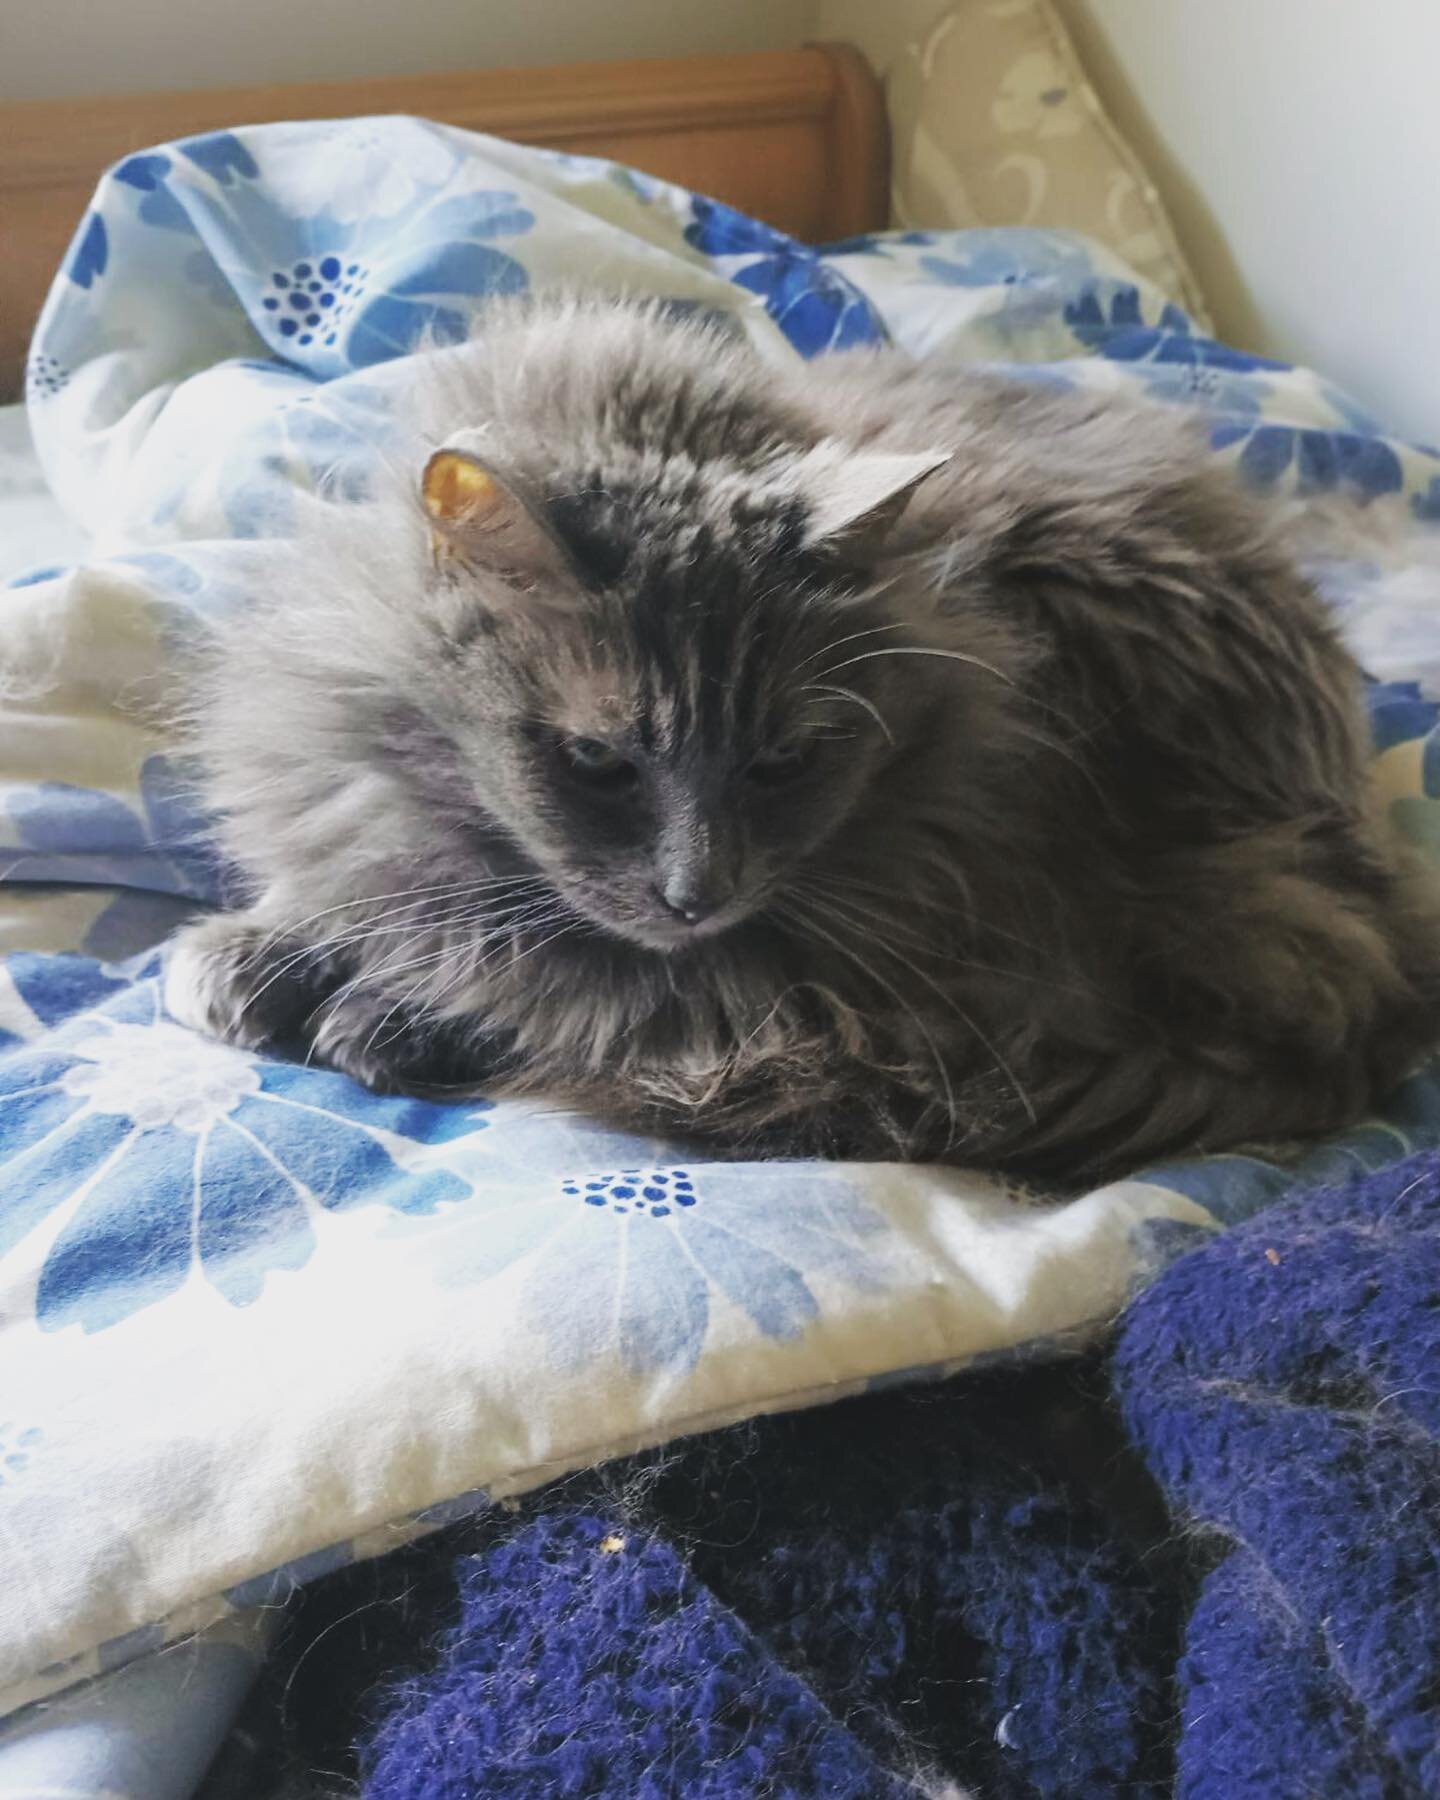 Meet 15-year-old Maxwell (grey) and 12-year-old Toni (orange) whose human recently died. These two beautiful long-haired cats had no place to go until a loving foster took them in. They are very healthy for their age and are fixed and up to date on s